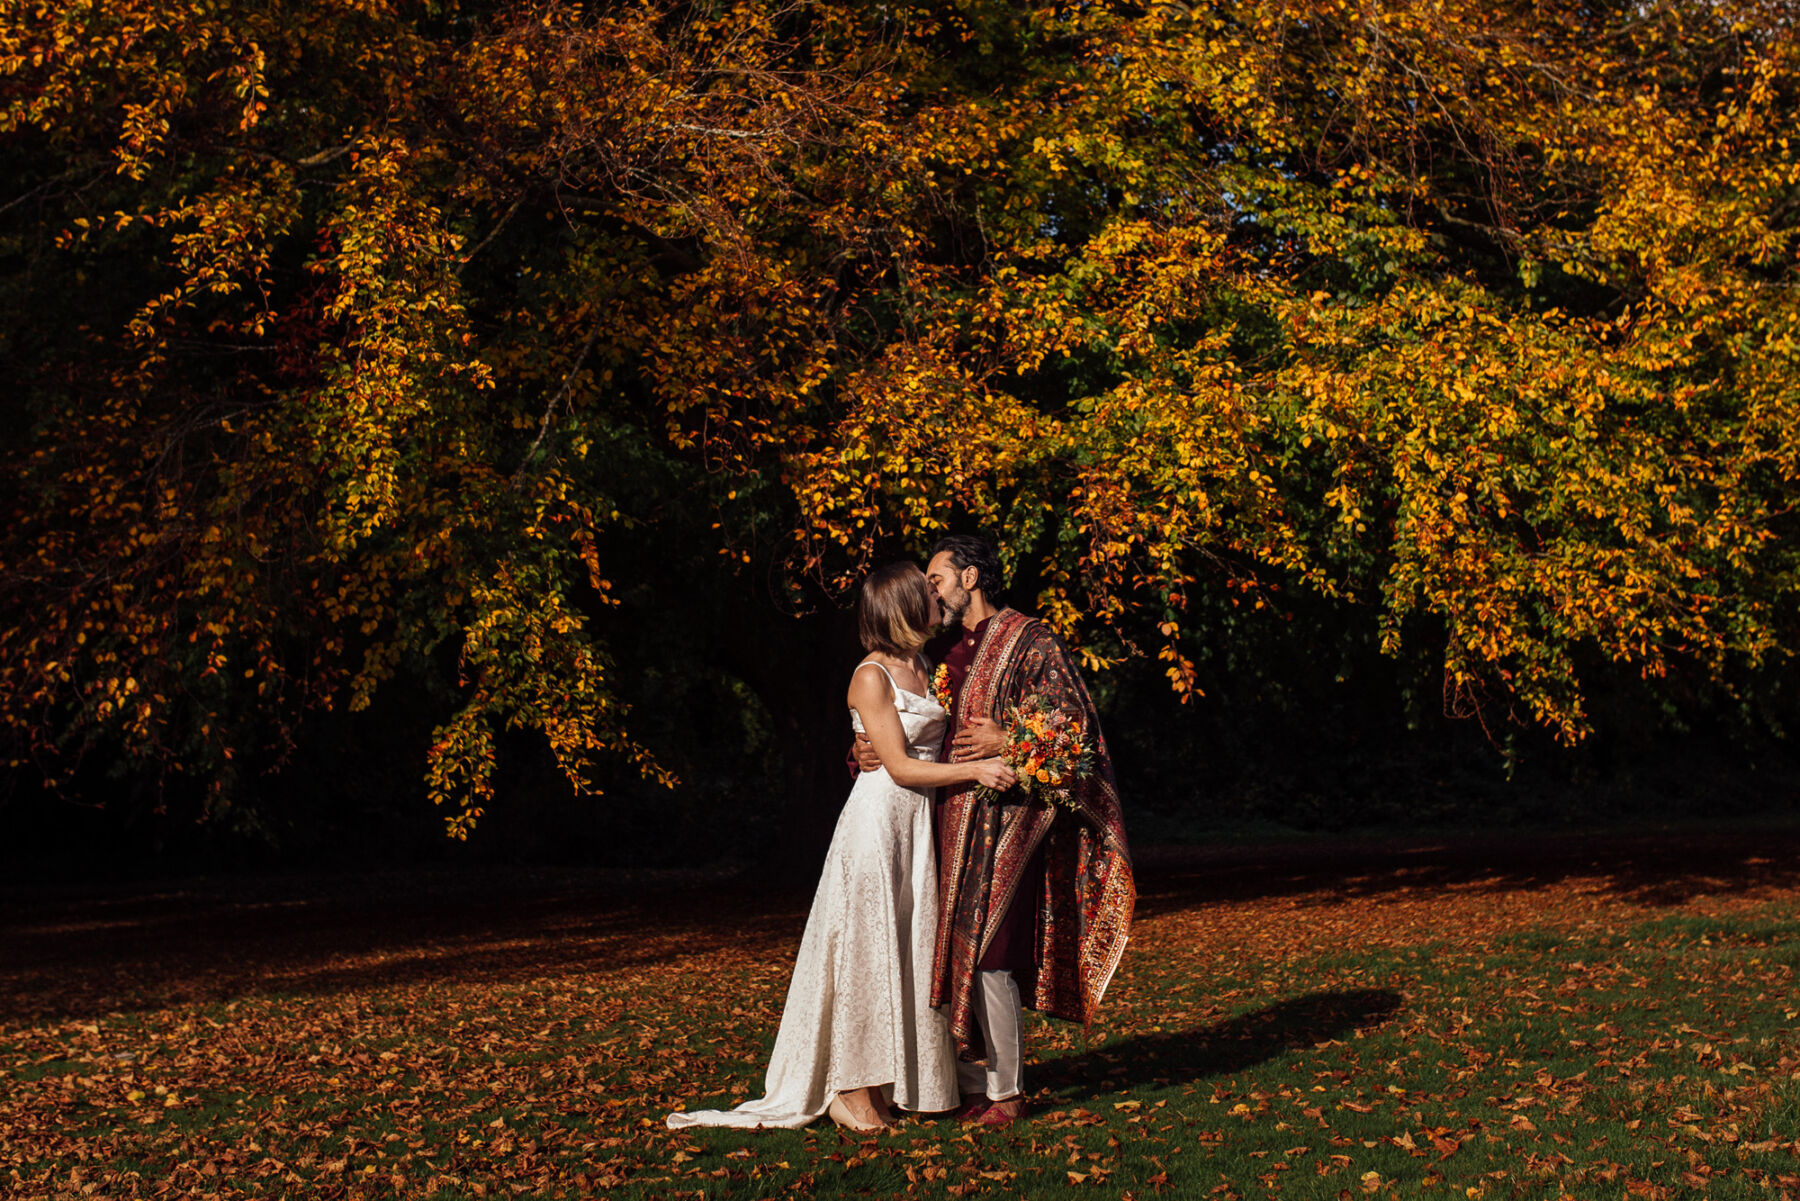 Mixed race bride and groom standing in Autumn leaves that have fallen from the trees at Barton Hall.